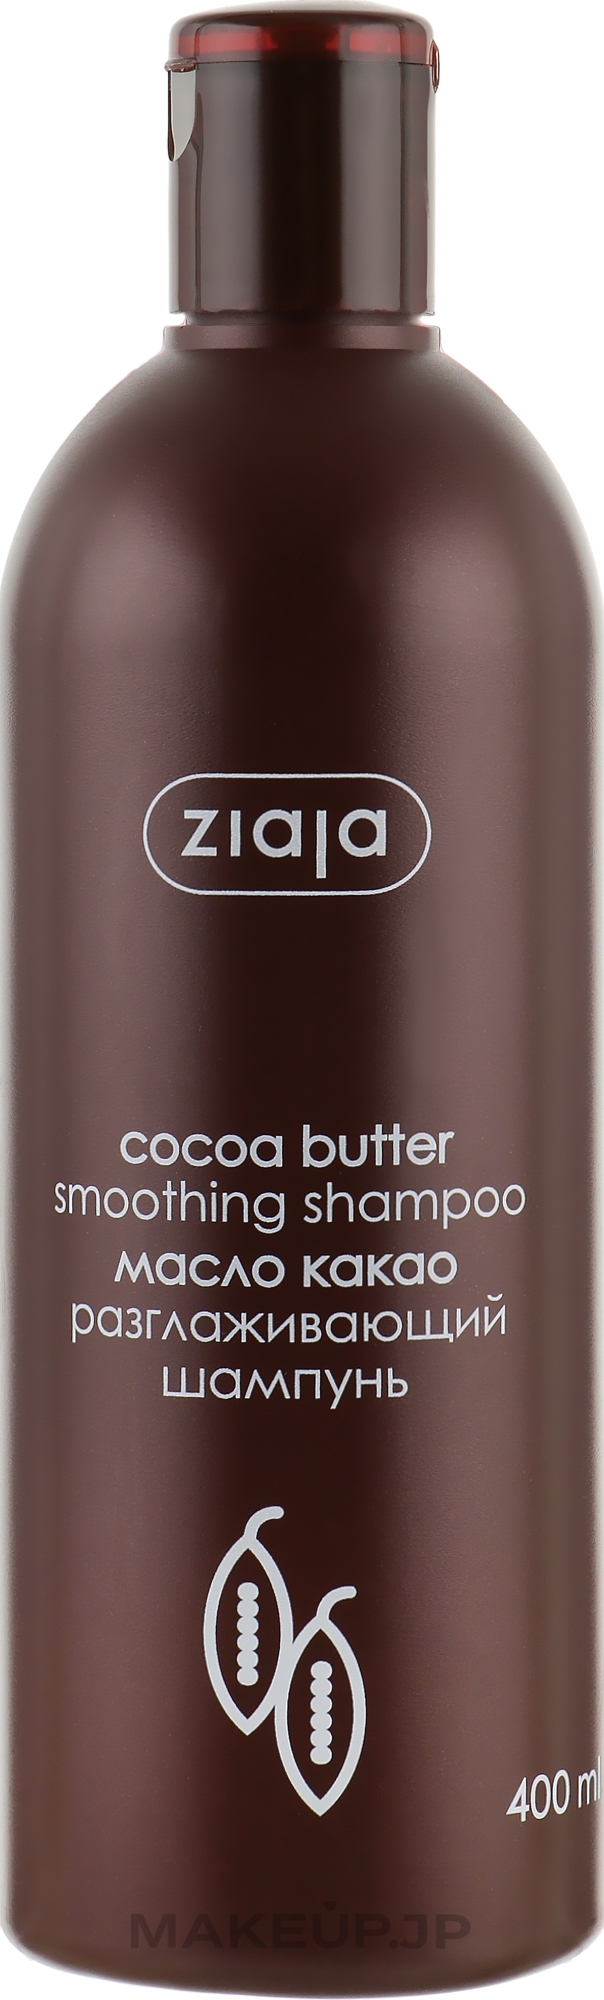 Dry and Damaged Hair Shampoo "Cacao Butter" - Ziaja Shampoo for Dry and Damaged Hair — photo 400 ml